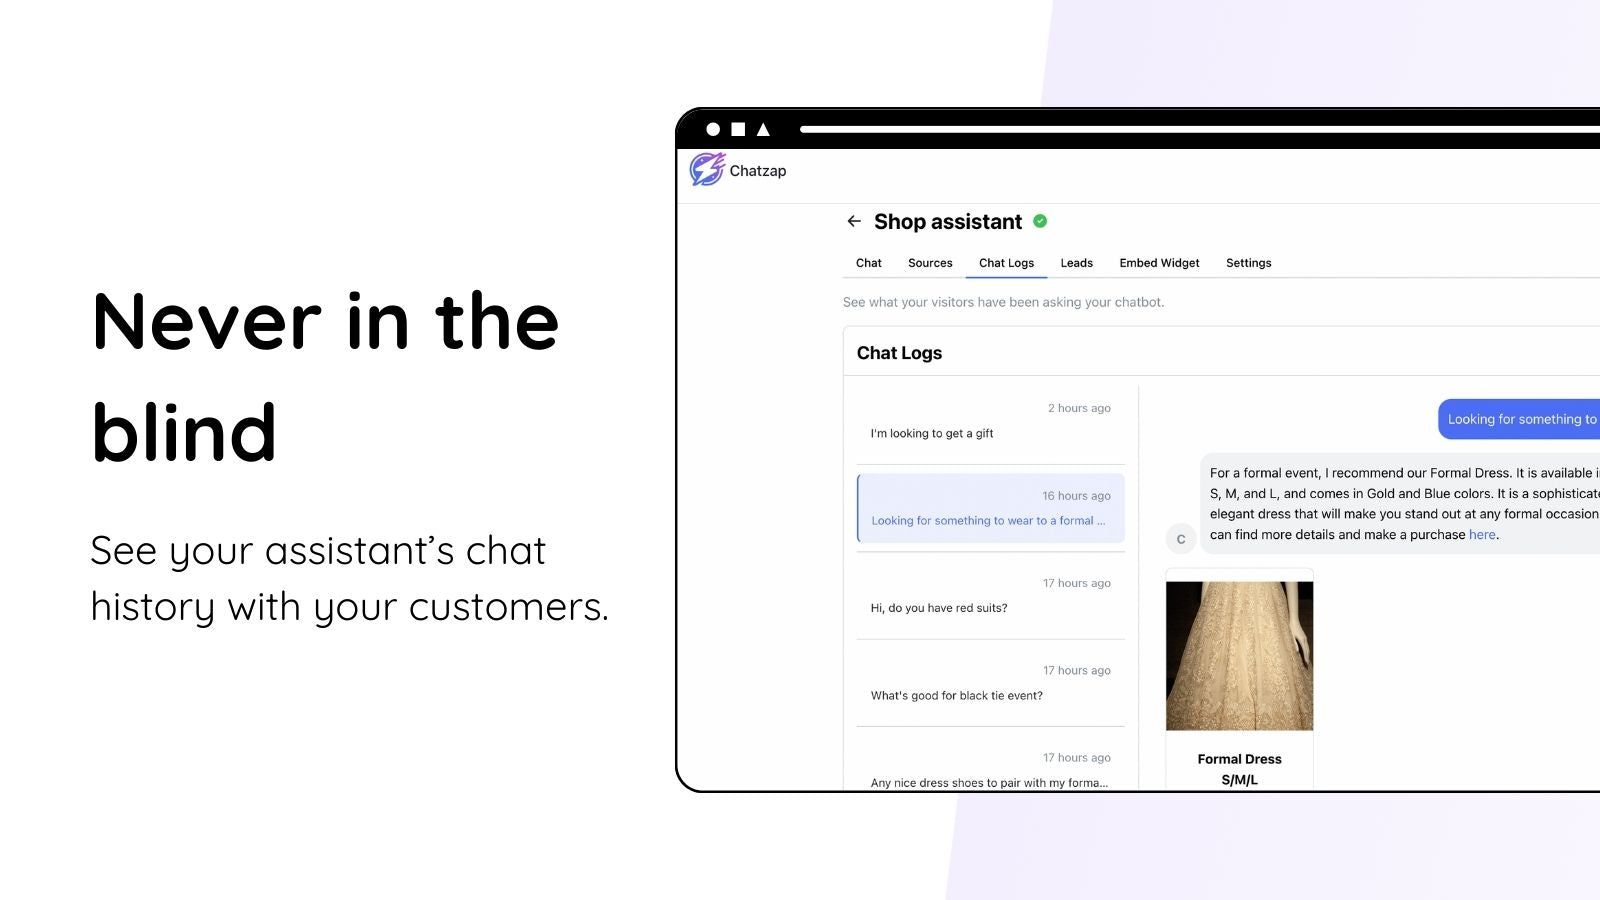 See your assistant's chat history with your customers.